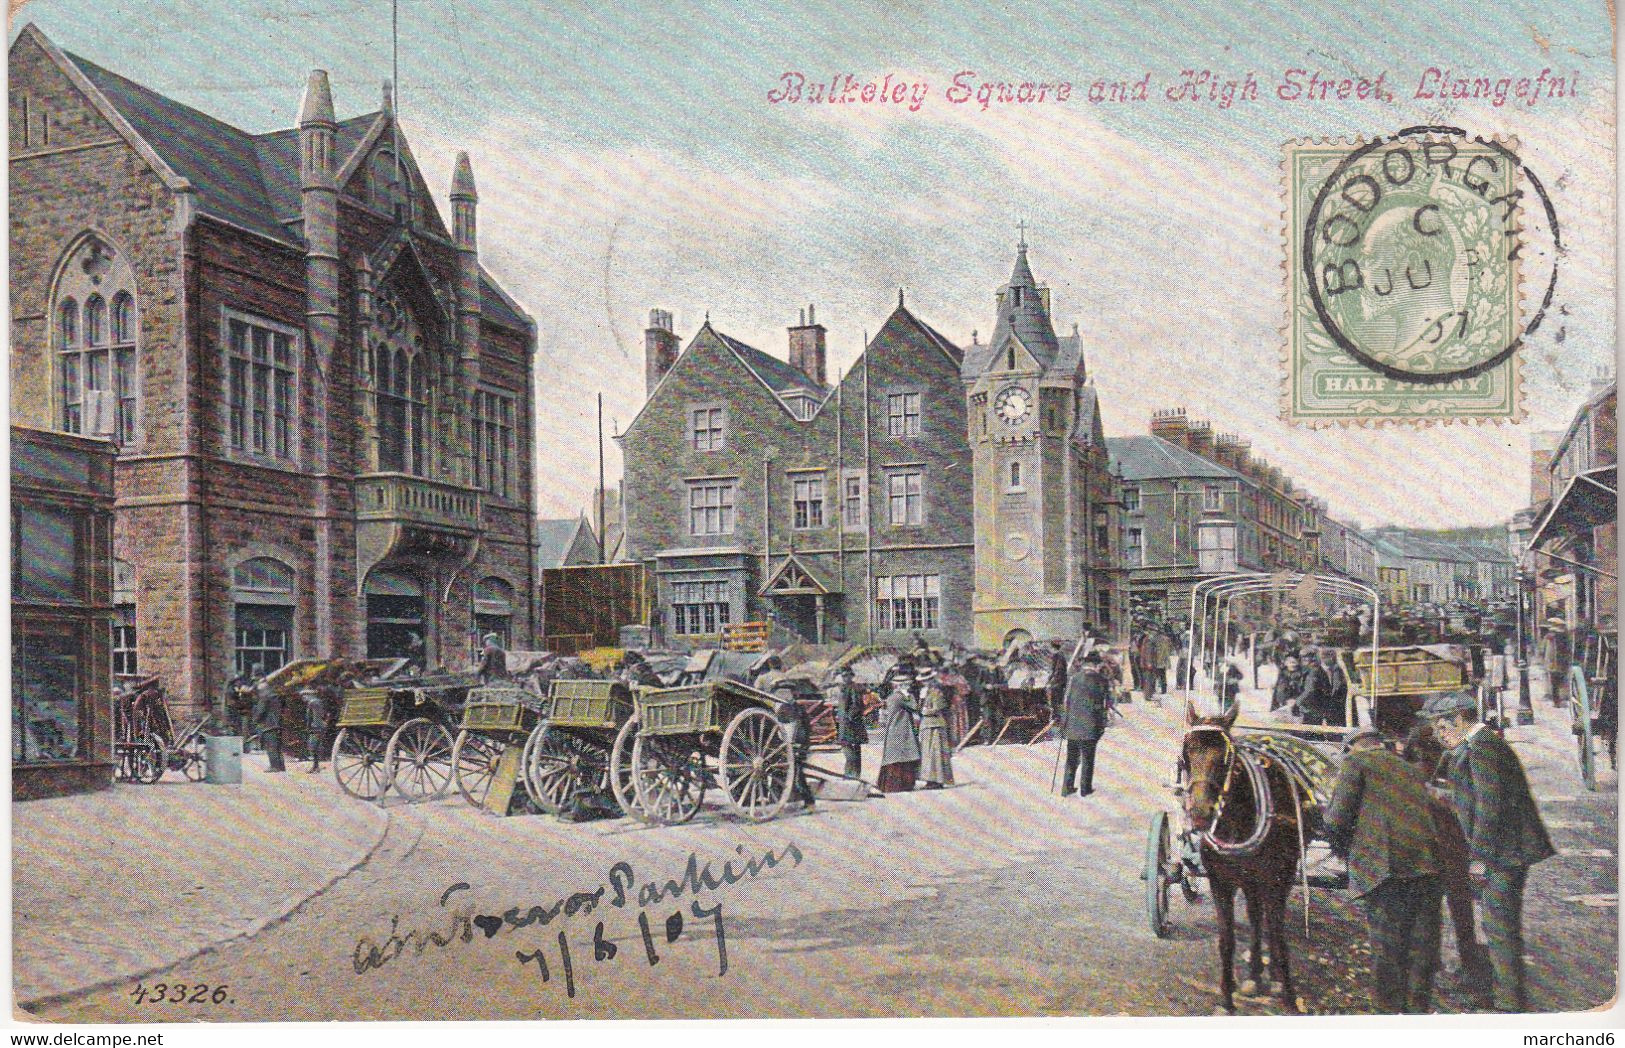 Bulkaley Square And High Street Llangefni édition Vanlentine N°43326 - Anglesey